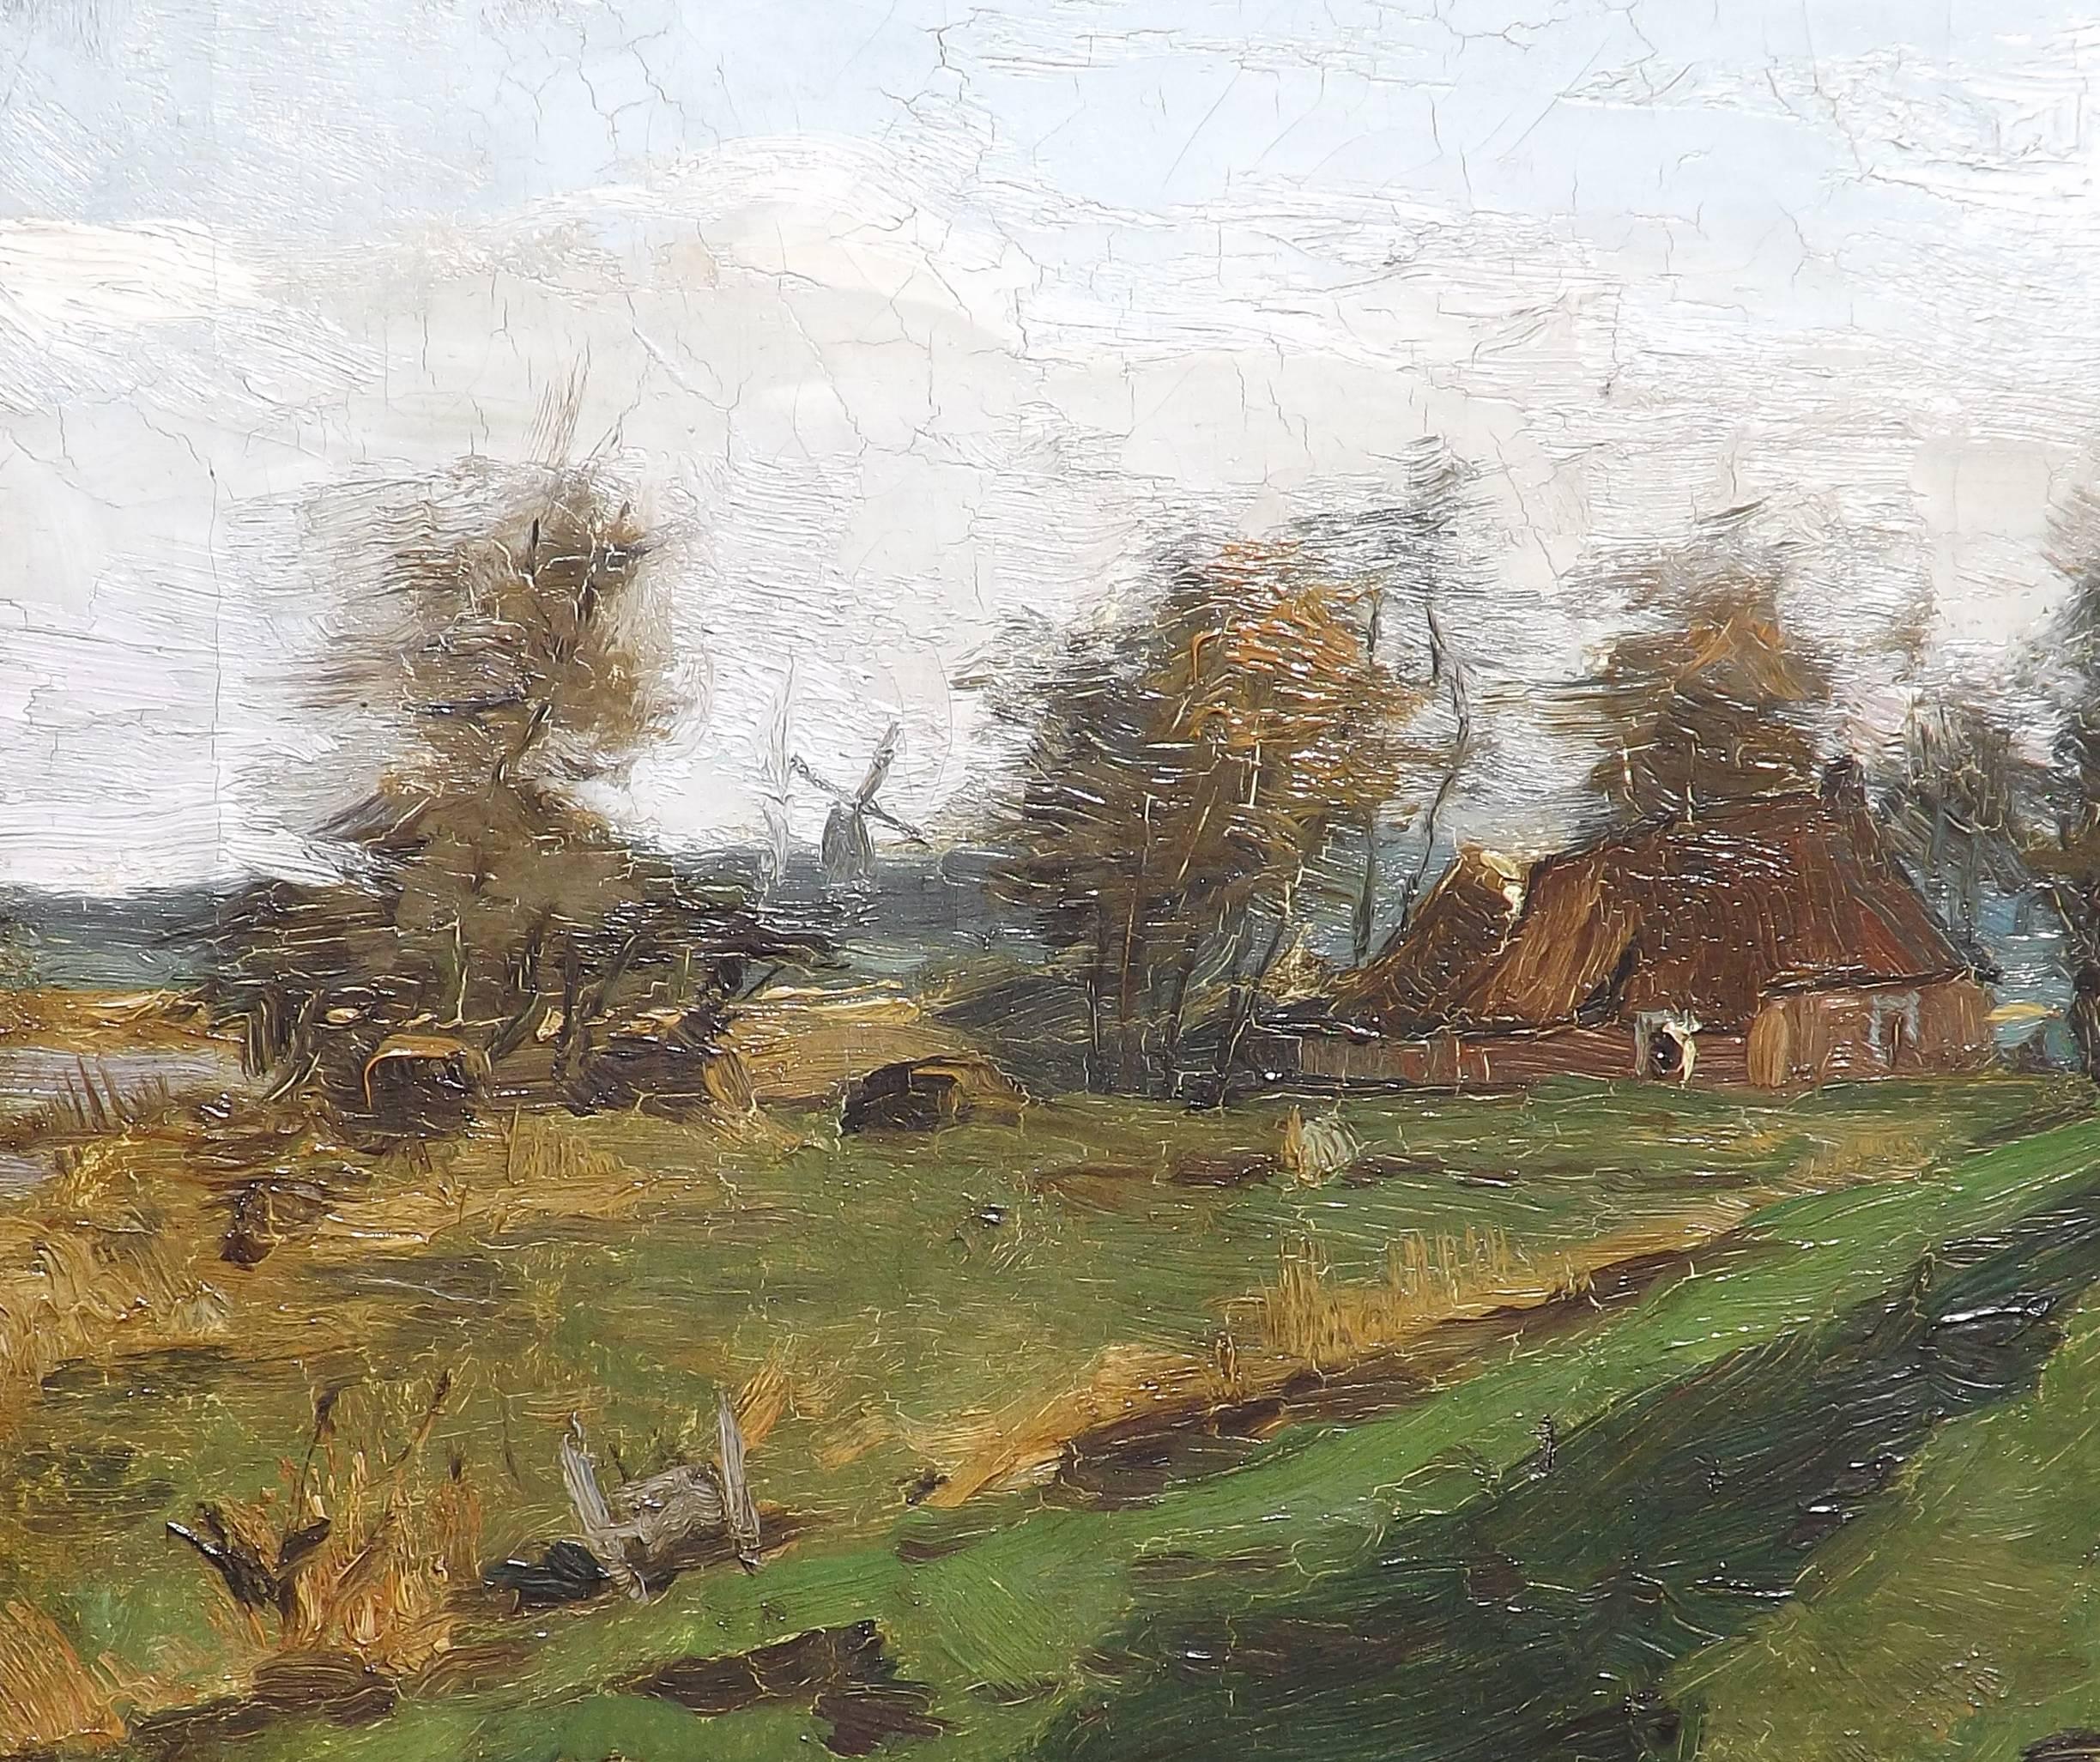 Dutch Landscape Painting of Paterswolde, the Netherlands by Jacob Madiol